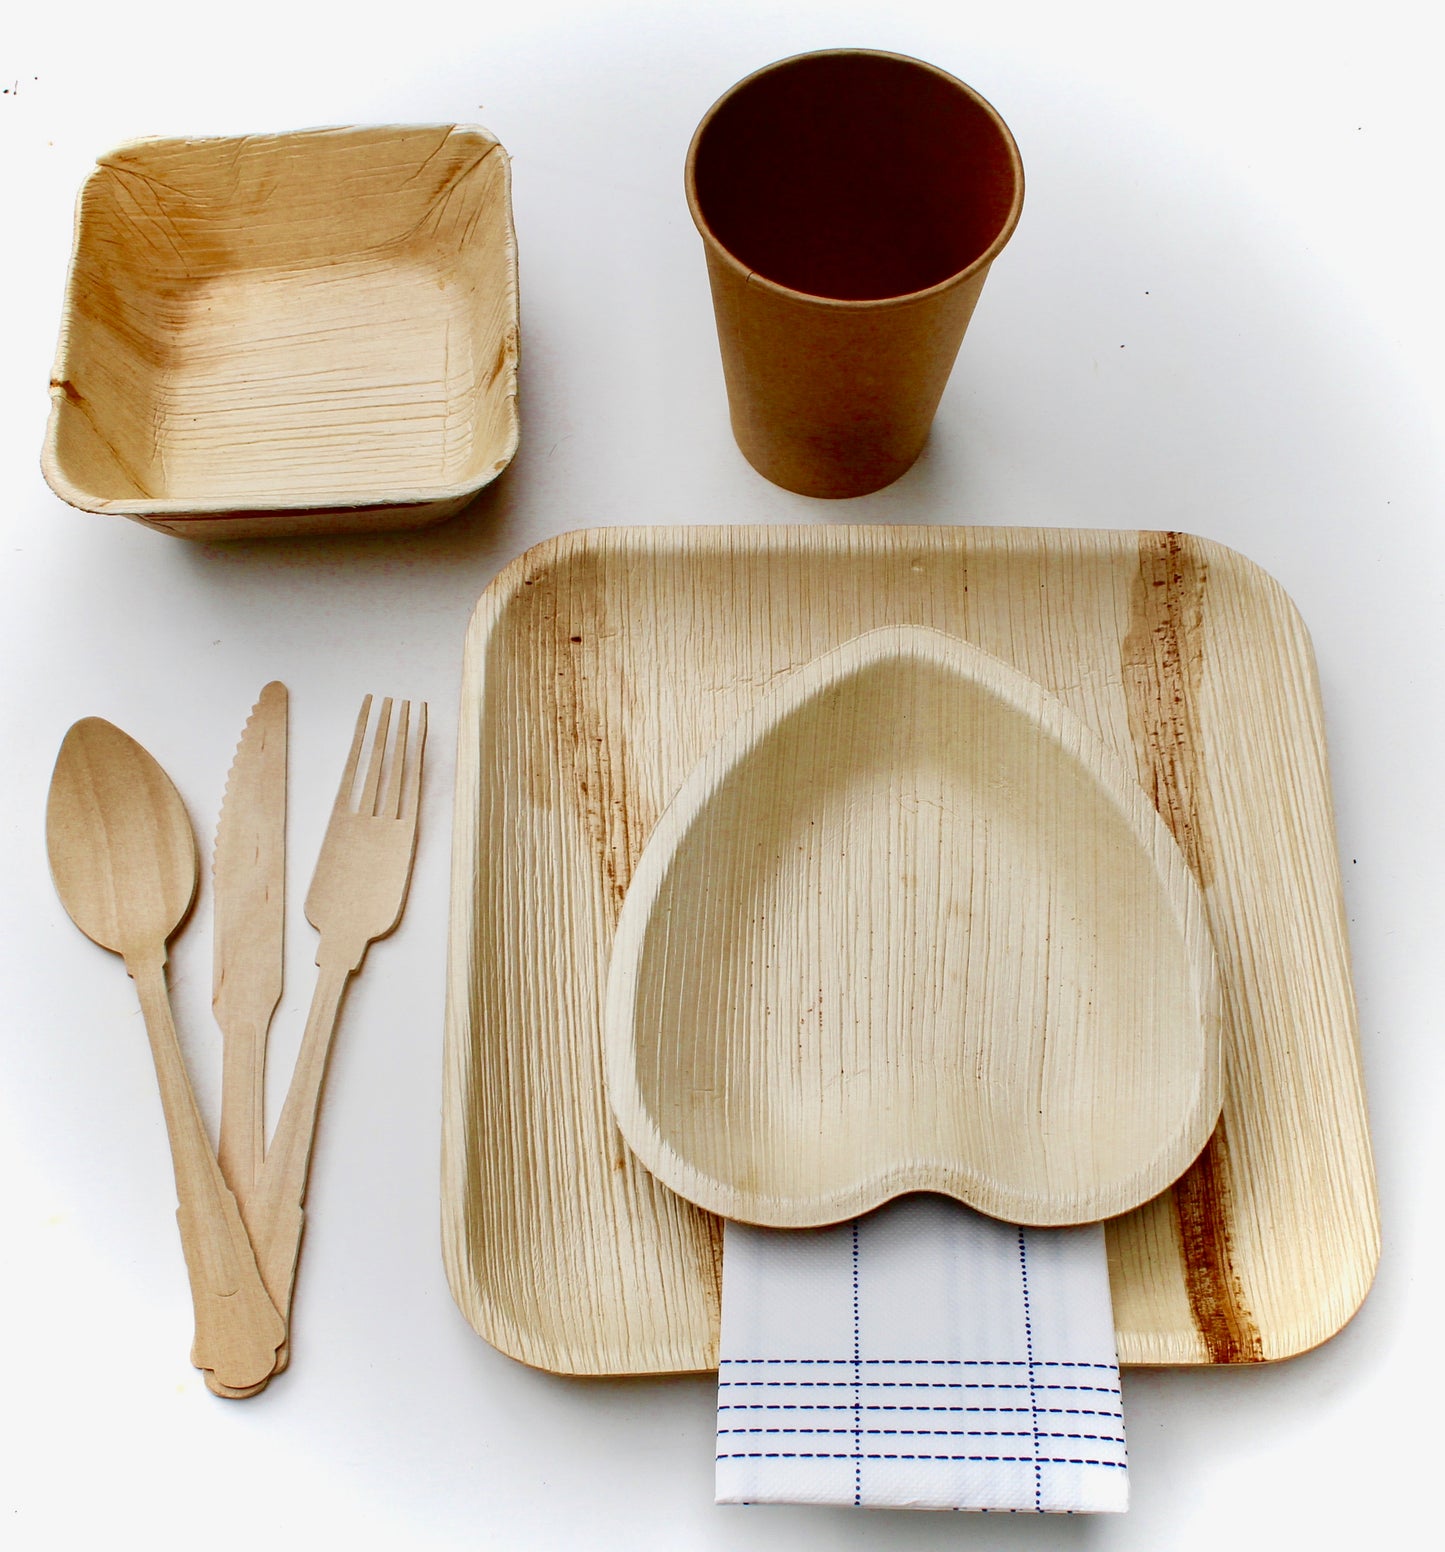 palm leaf plates 50 pice Square 9.5" disposable and biodegrable - compostable